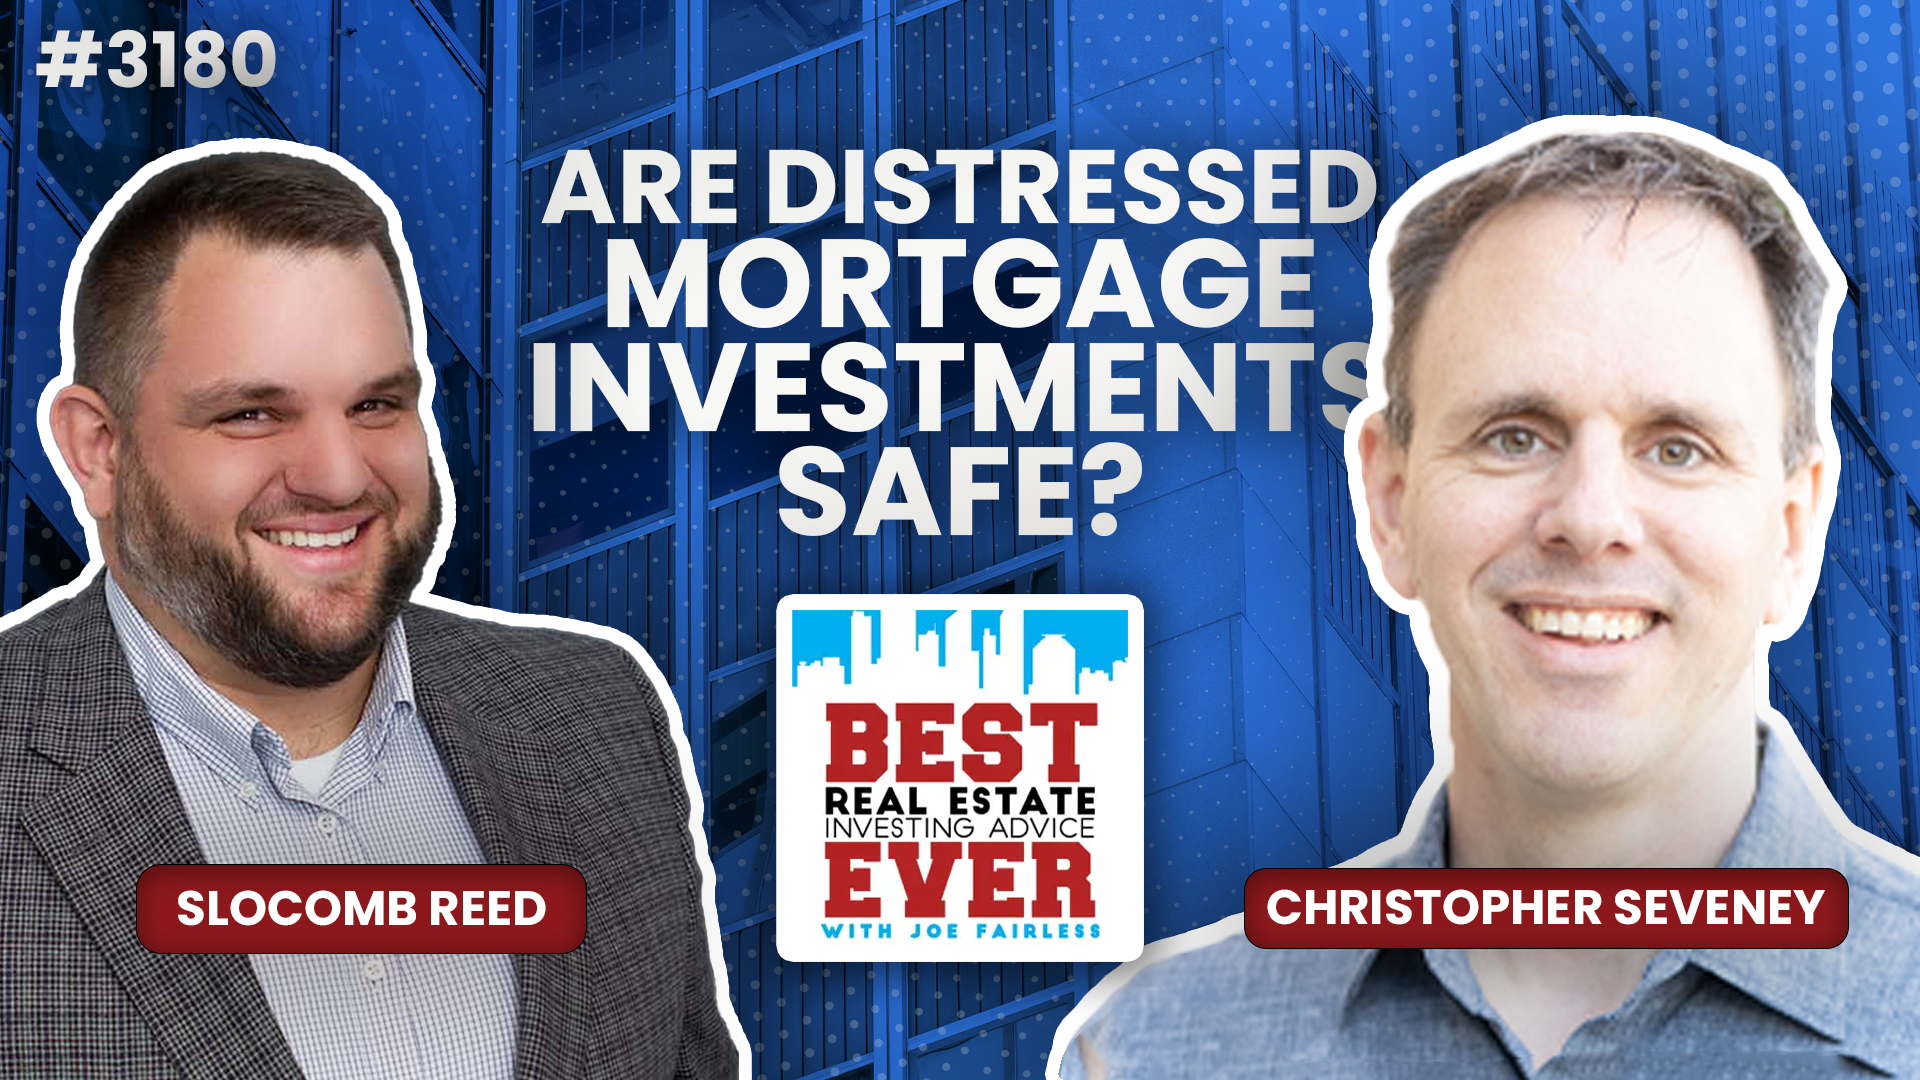 JF3180: Are Distressed Mortgage Investments Safe? ft. Christopher Seveney